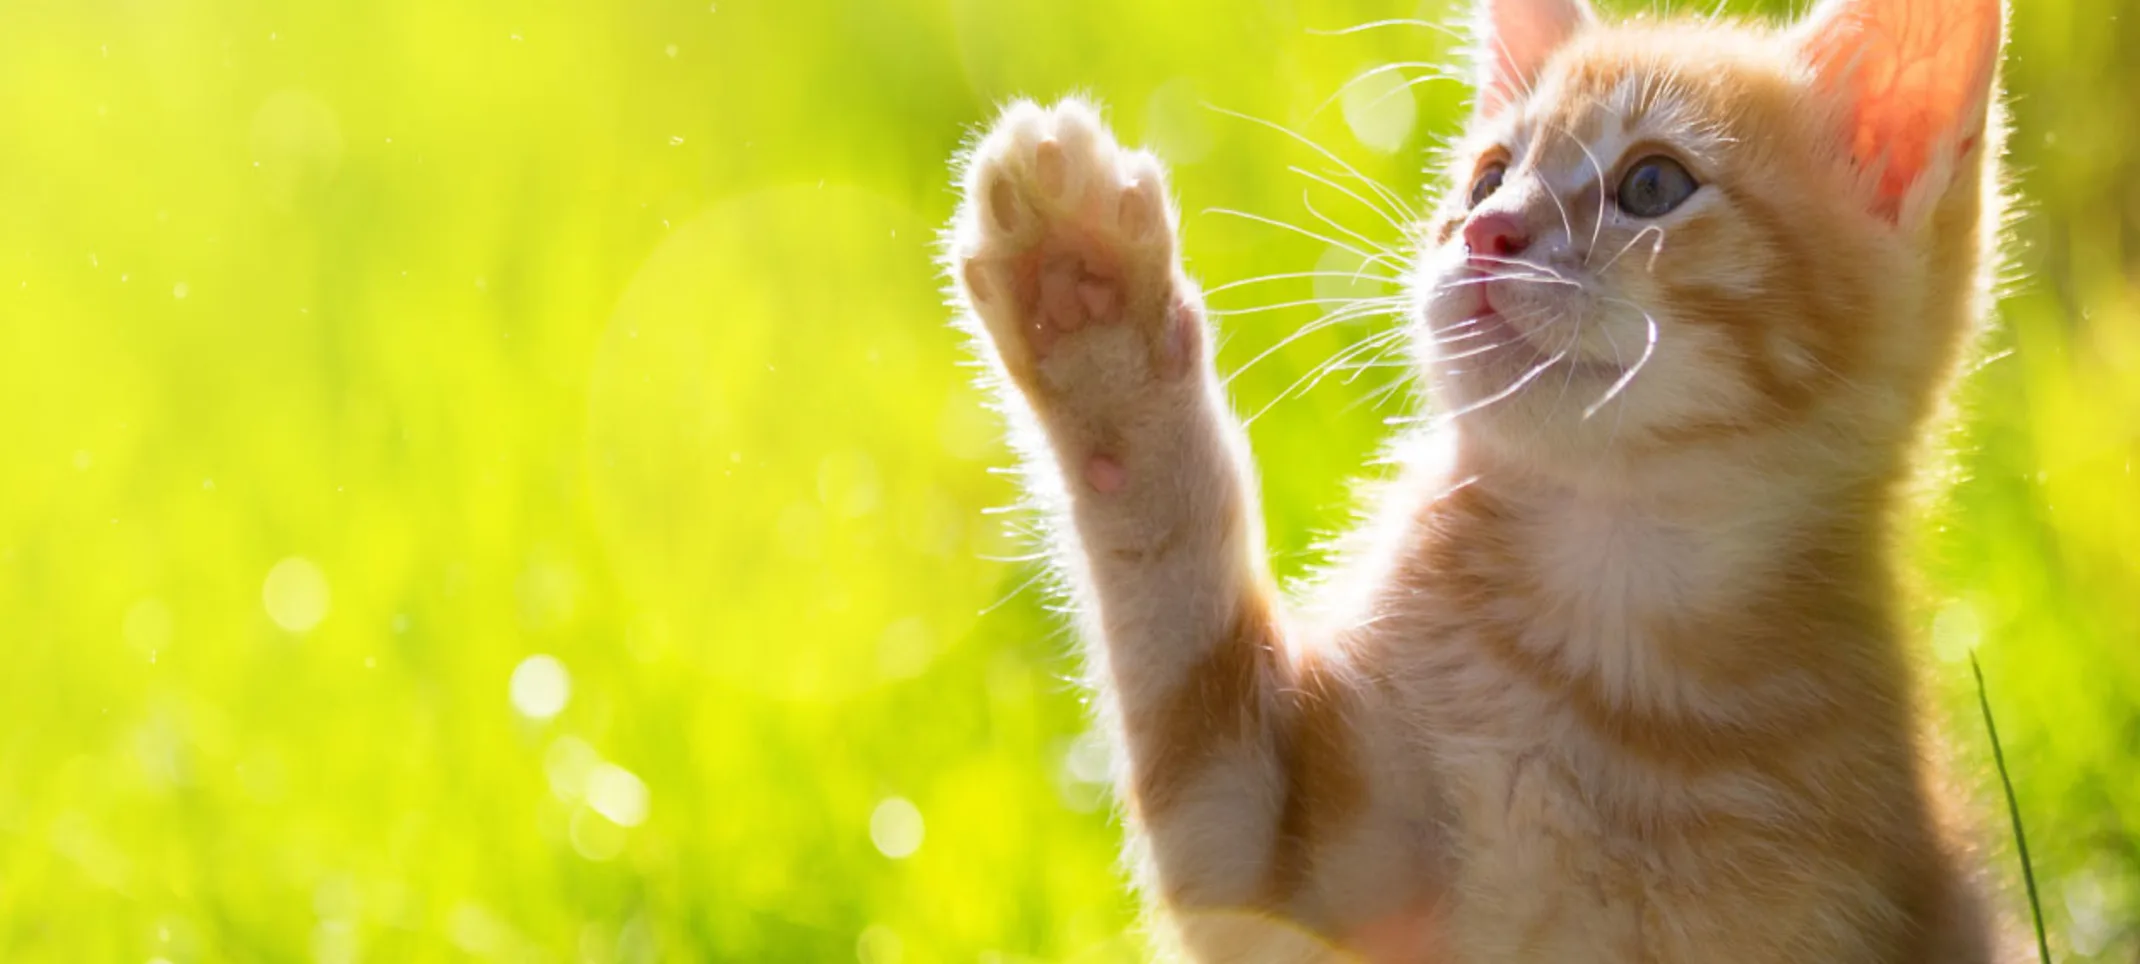 Orange tabby kitten playing on a grassy sunny field and reaching out for a butterfly flying.